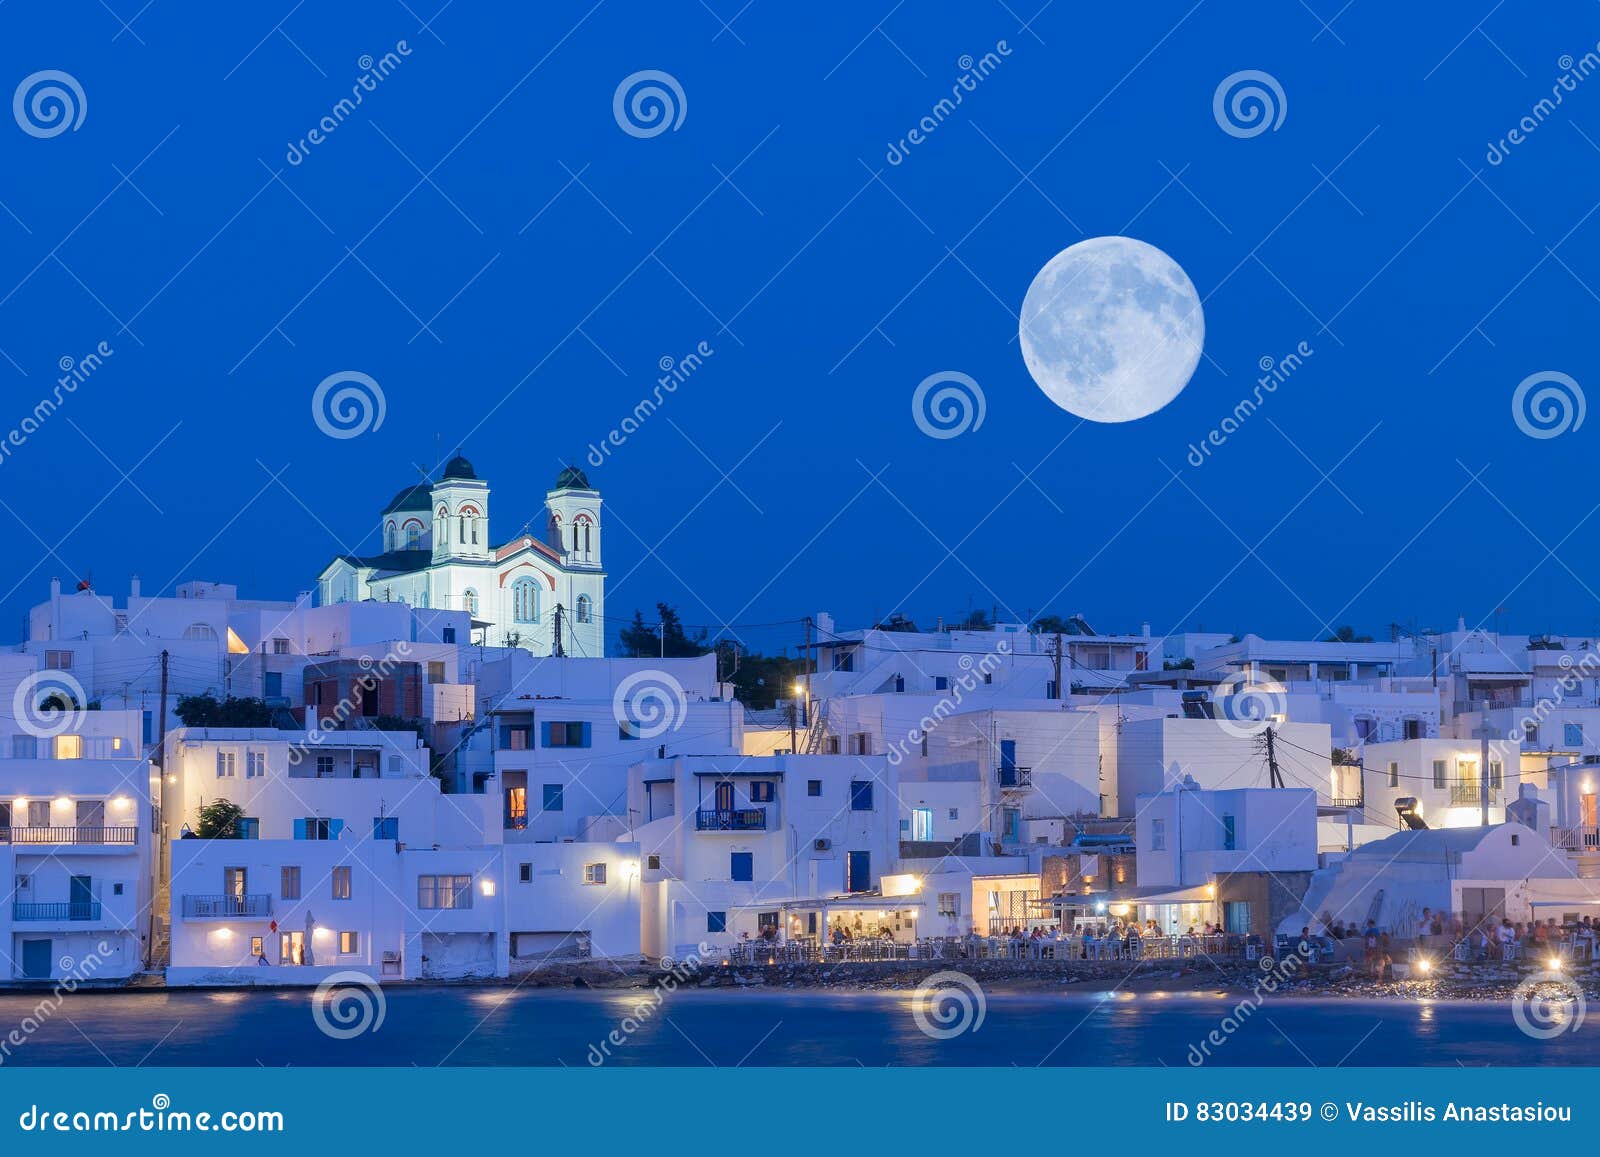 local church of naoussa village at paros island in greece against the full moon.